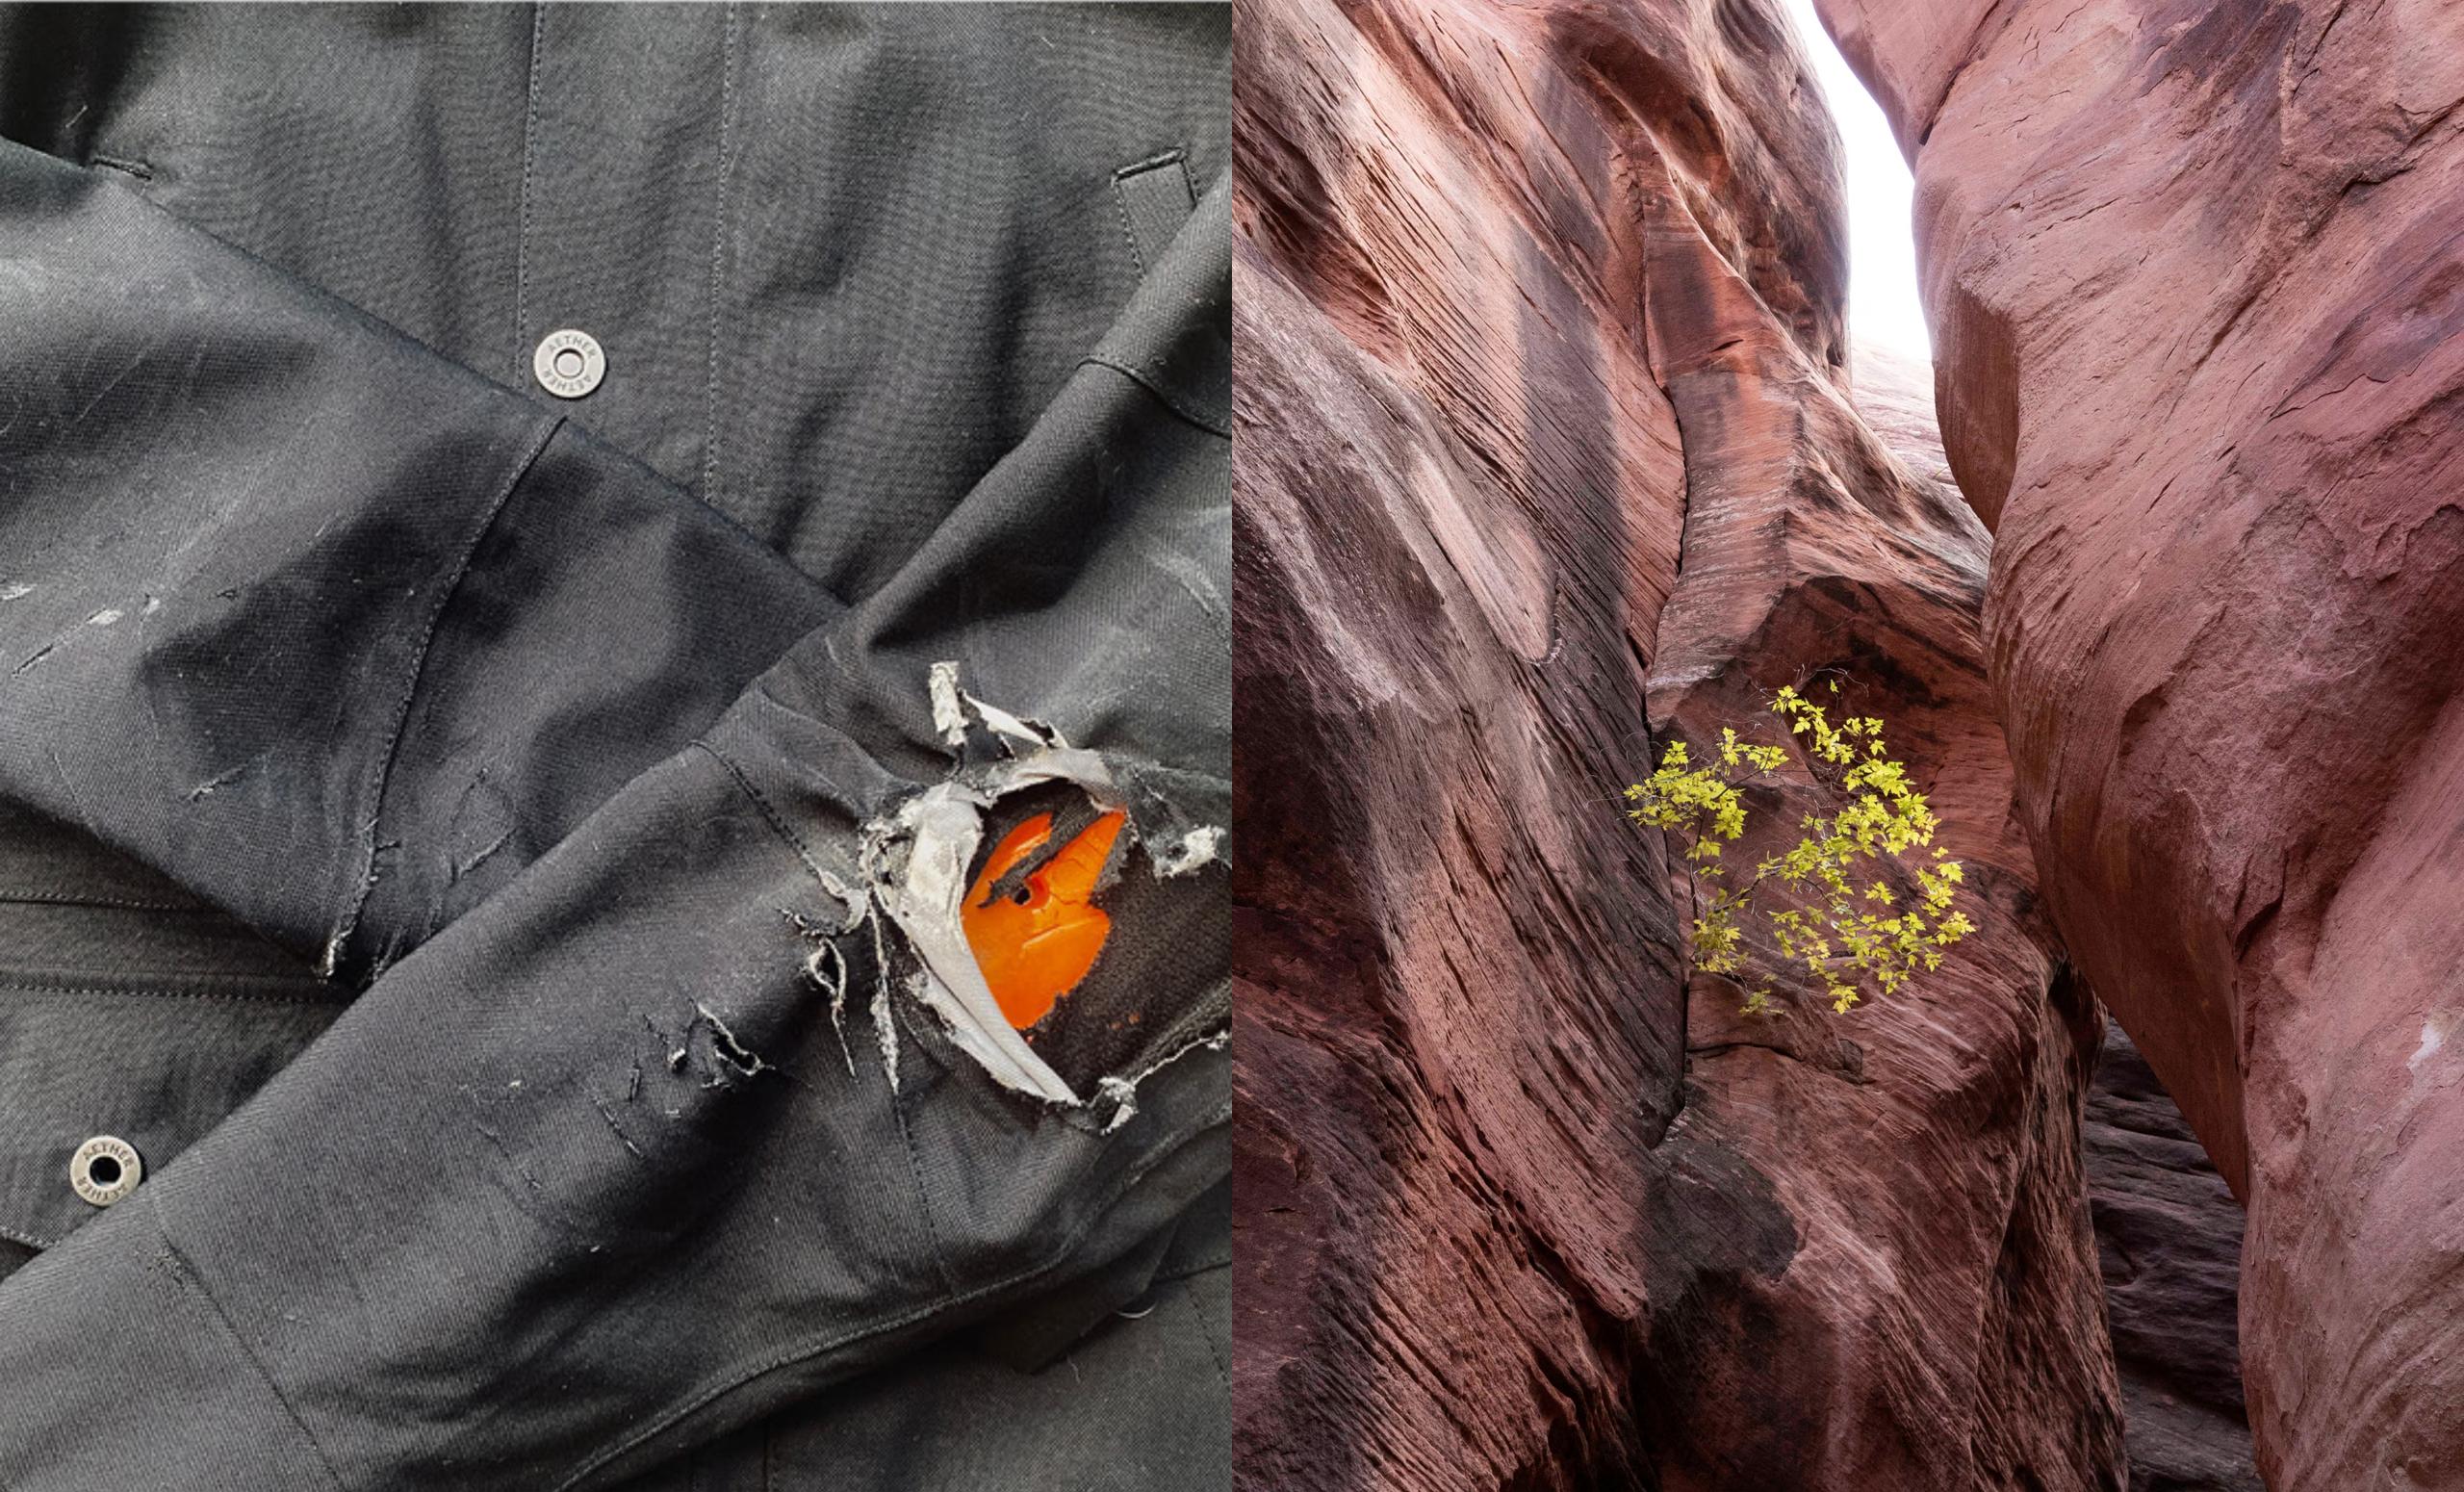 Photo of torn AETHER moto jacket juxtaposed with photo of yellow plant inside slot canyon in Utah